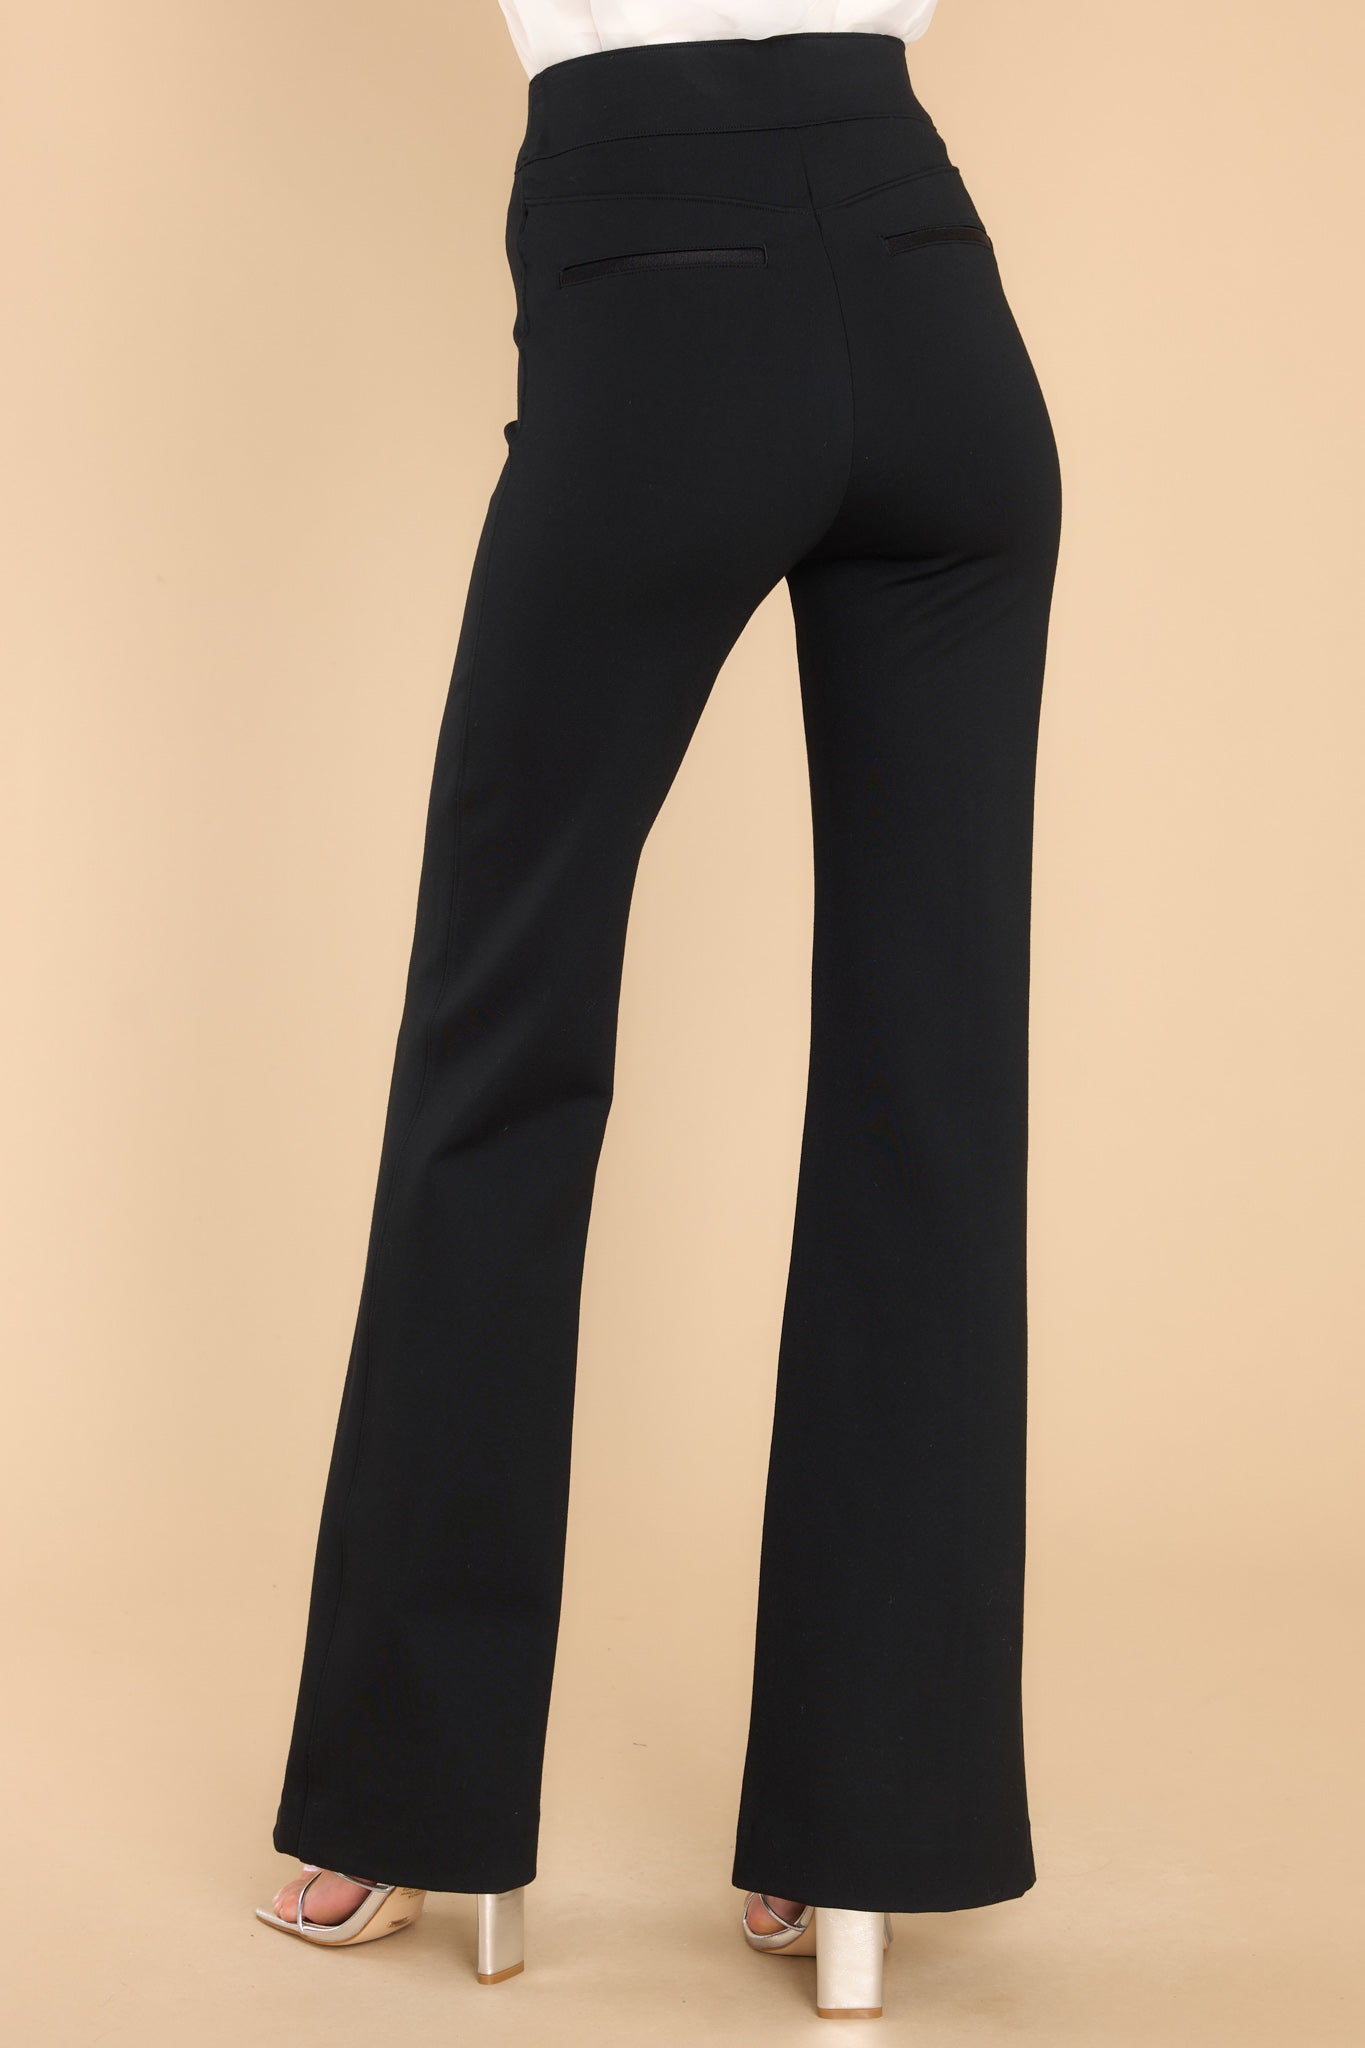 Spanx women's the perfect black pant, ankle 4-pocket classic pull